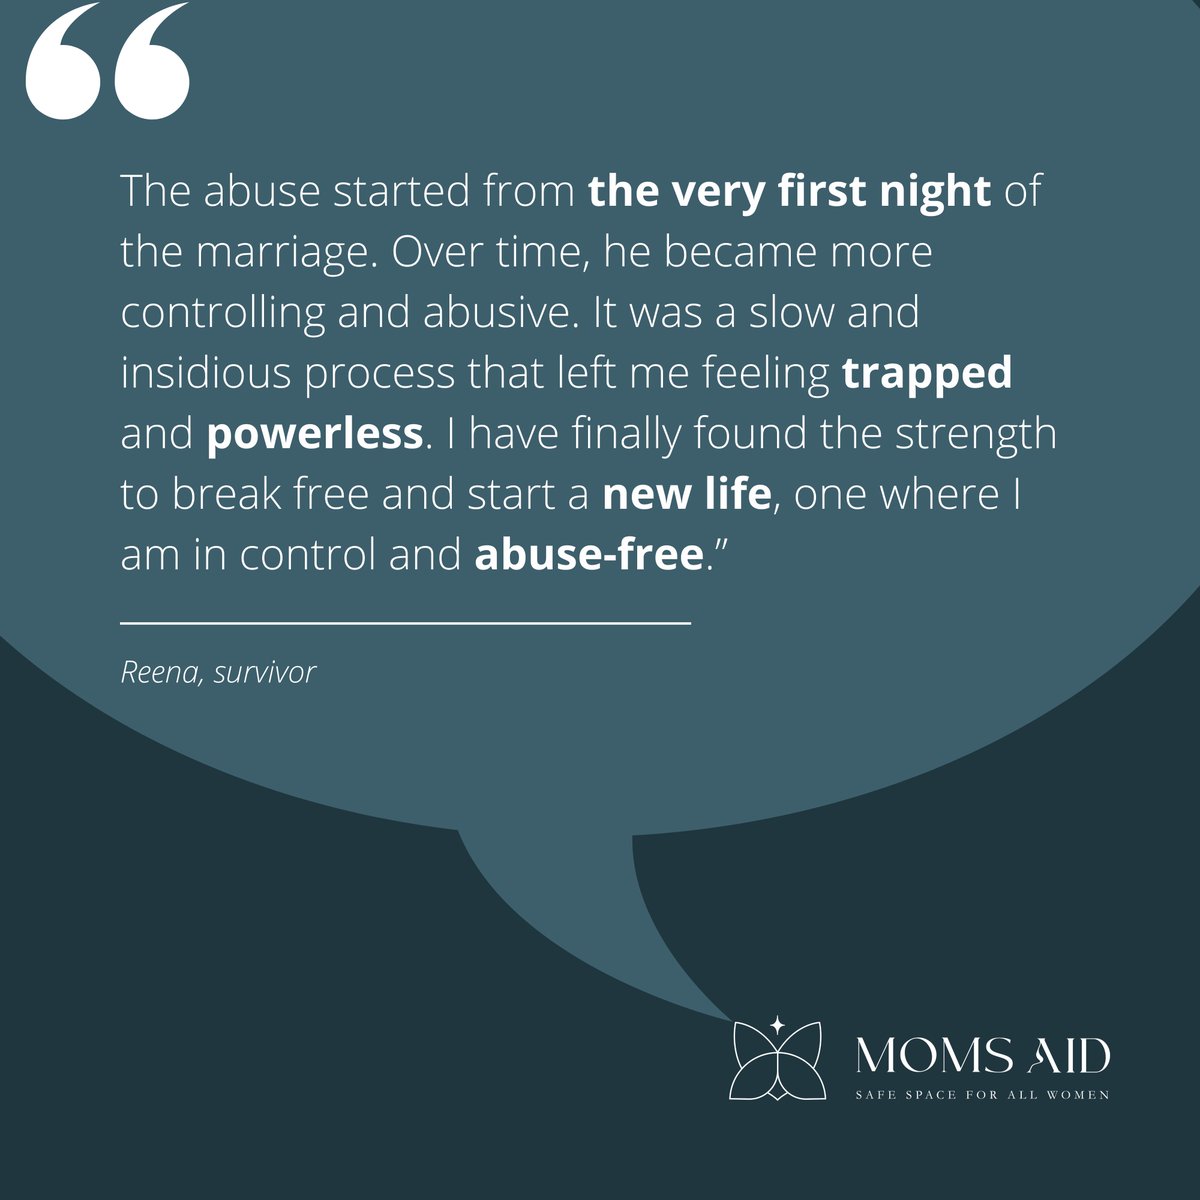 Behind closed doors, abuse can be hidden and insidious. It's time to break the silence and shine a light on this important issue.

#domesticabuse #domesticabuseawareness #unitedtogethertoendviolence
#endviolencetogether #MomsAid #risingtogether